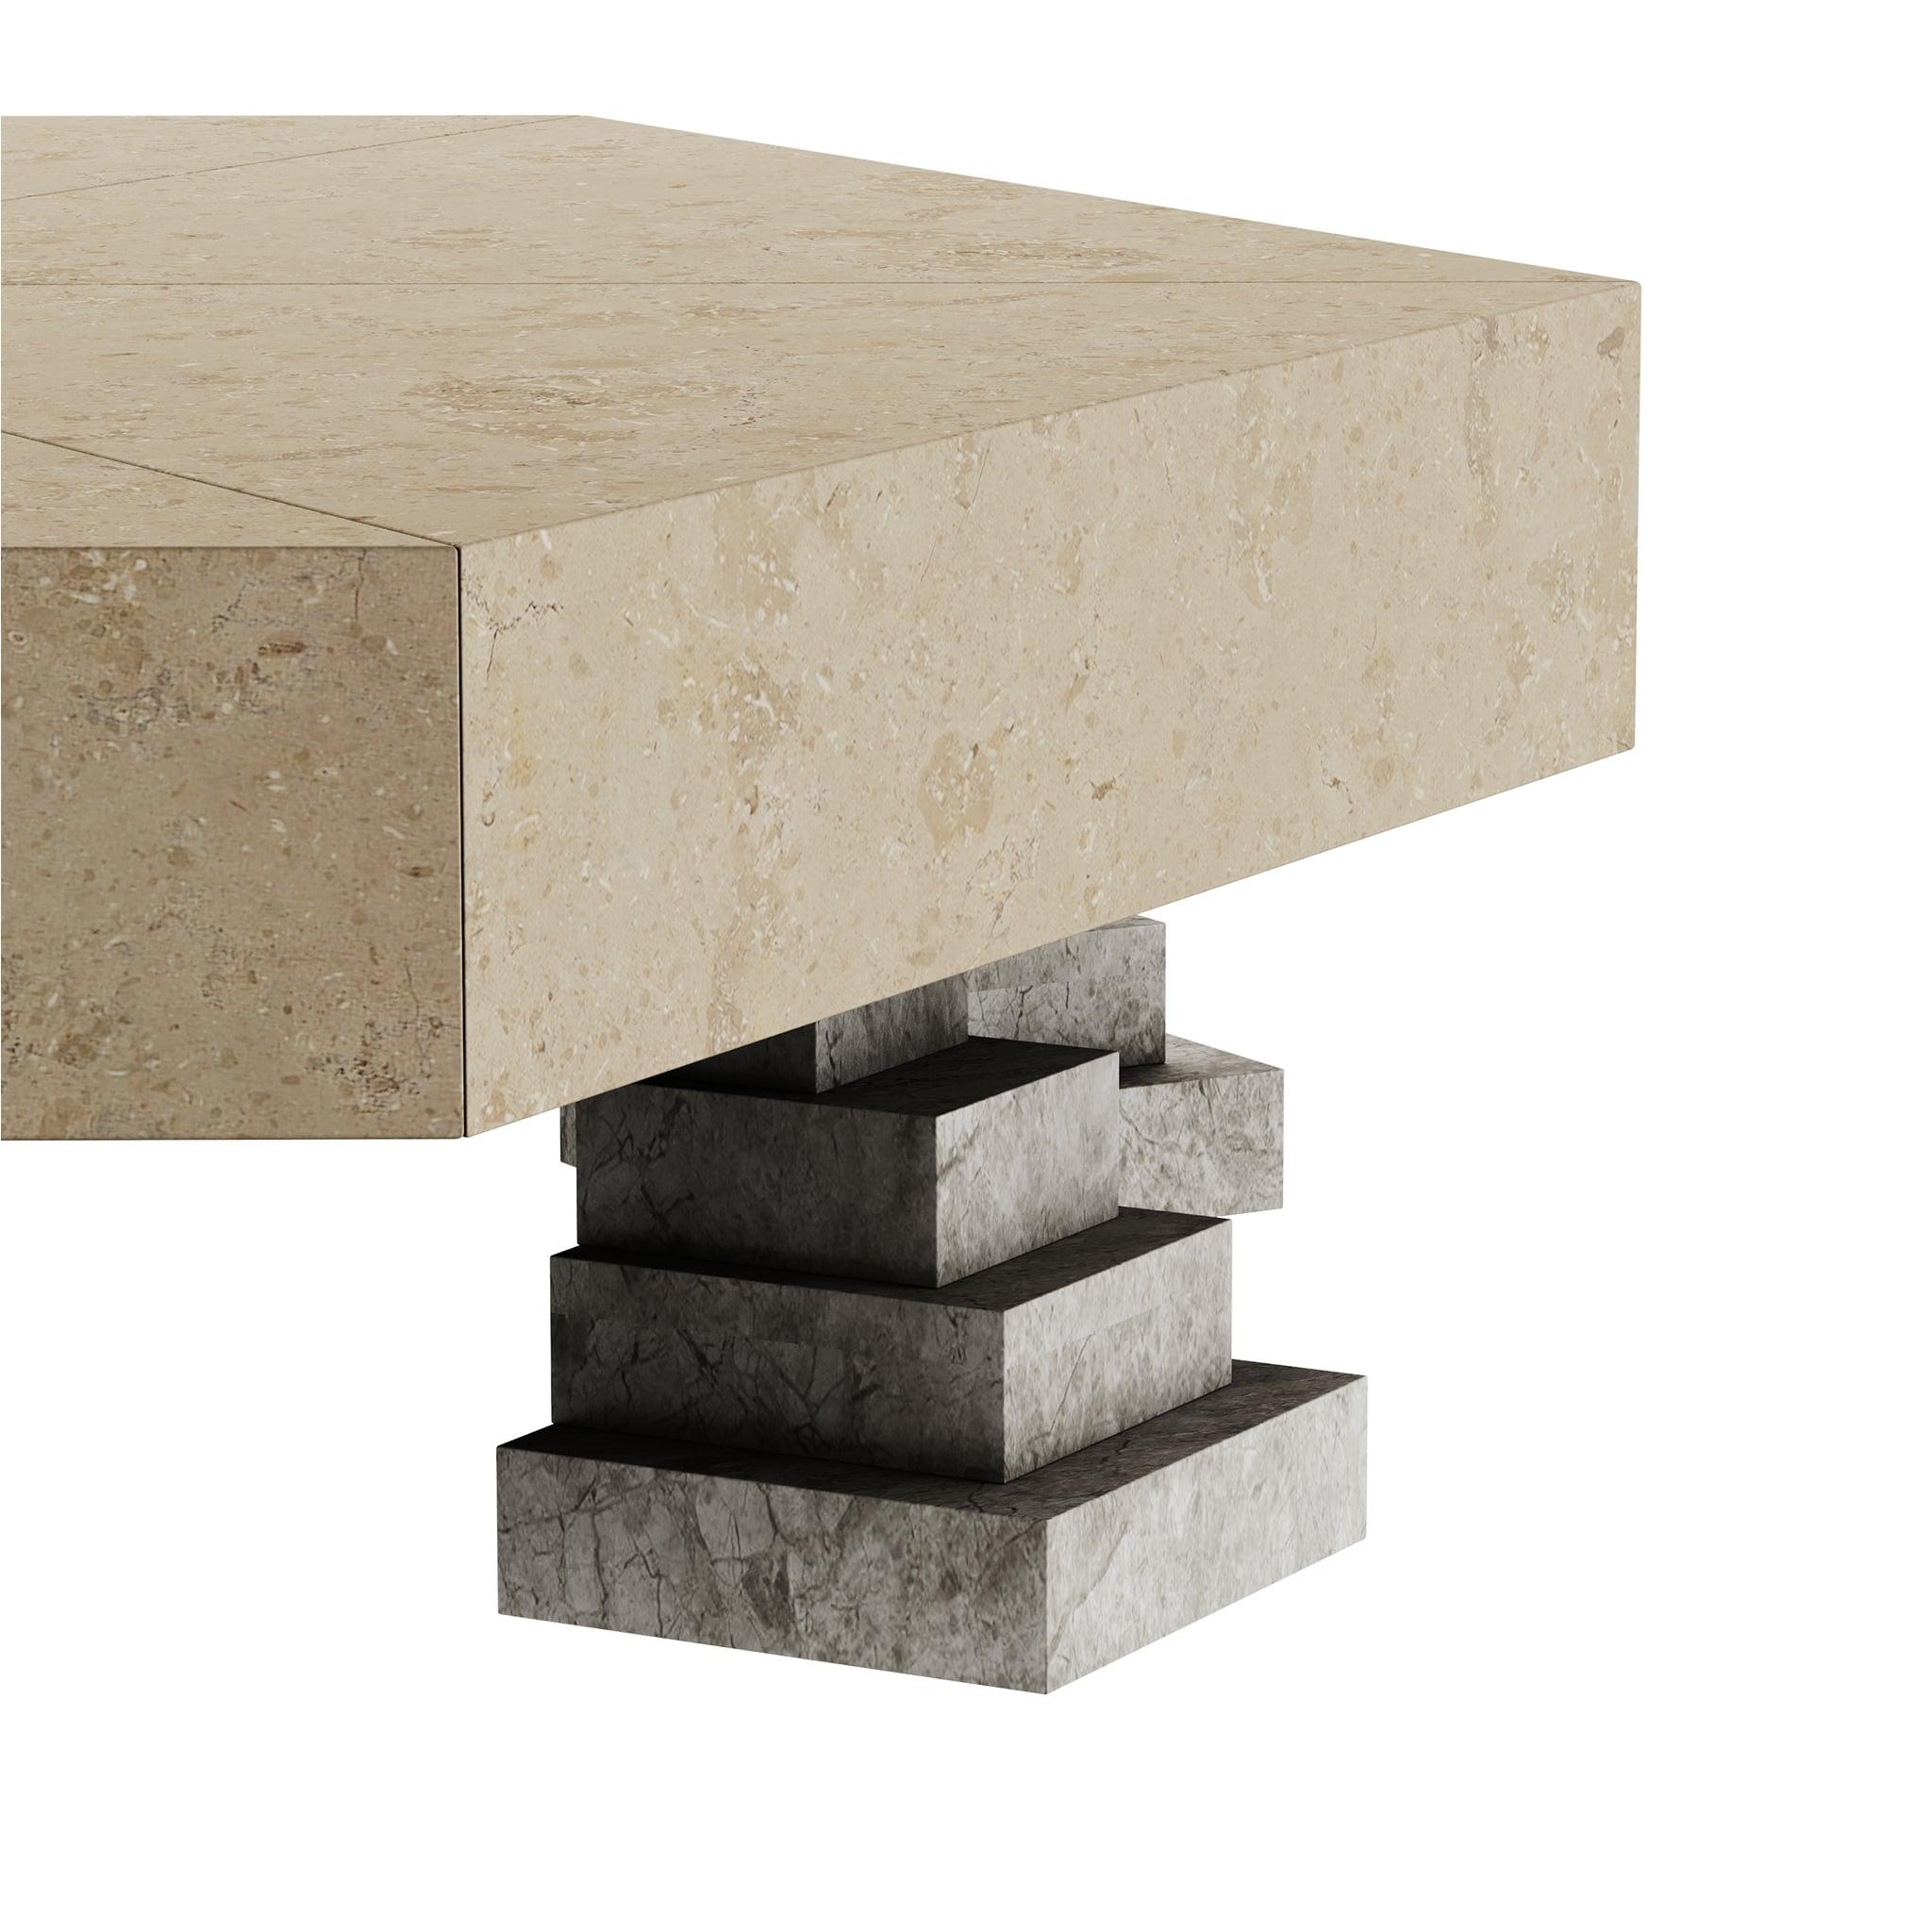 Odonto Center Table Natural is a modern center table that is an excellent choice for a contemporary outdoor design. With some influences from the Memphis design, the stone center table is suitable for outdoor decor. The outdoor center table’s almost